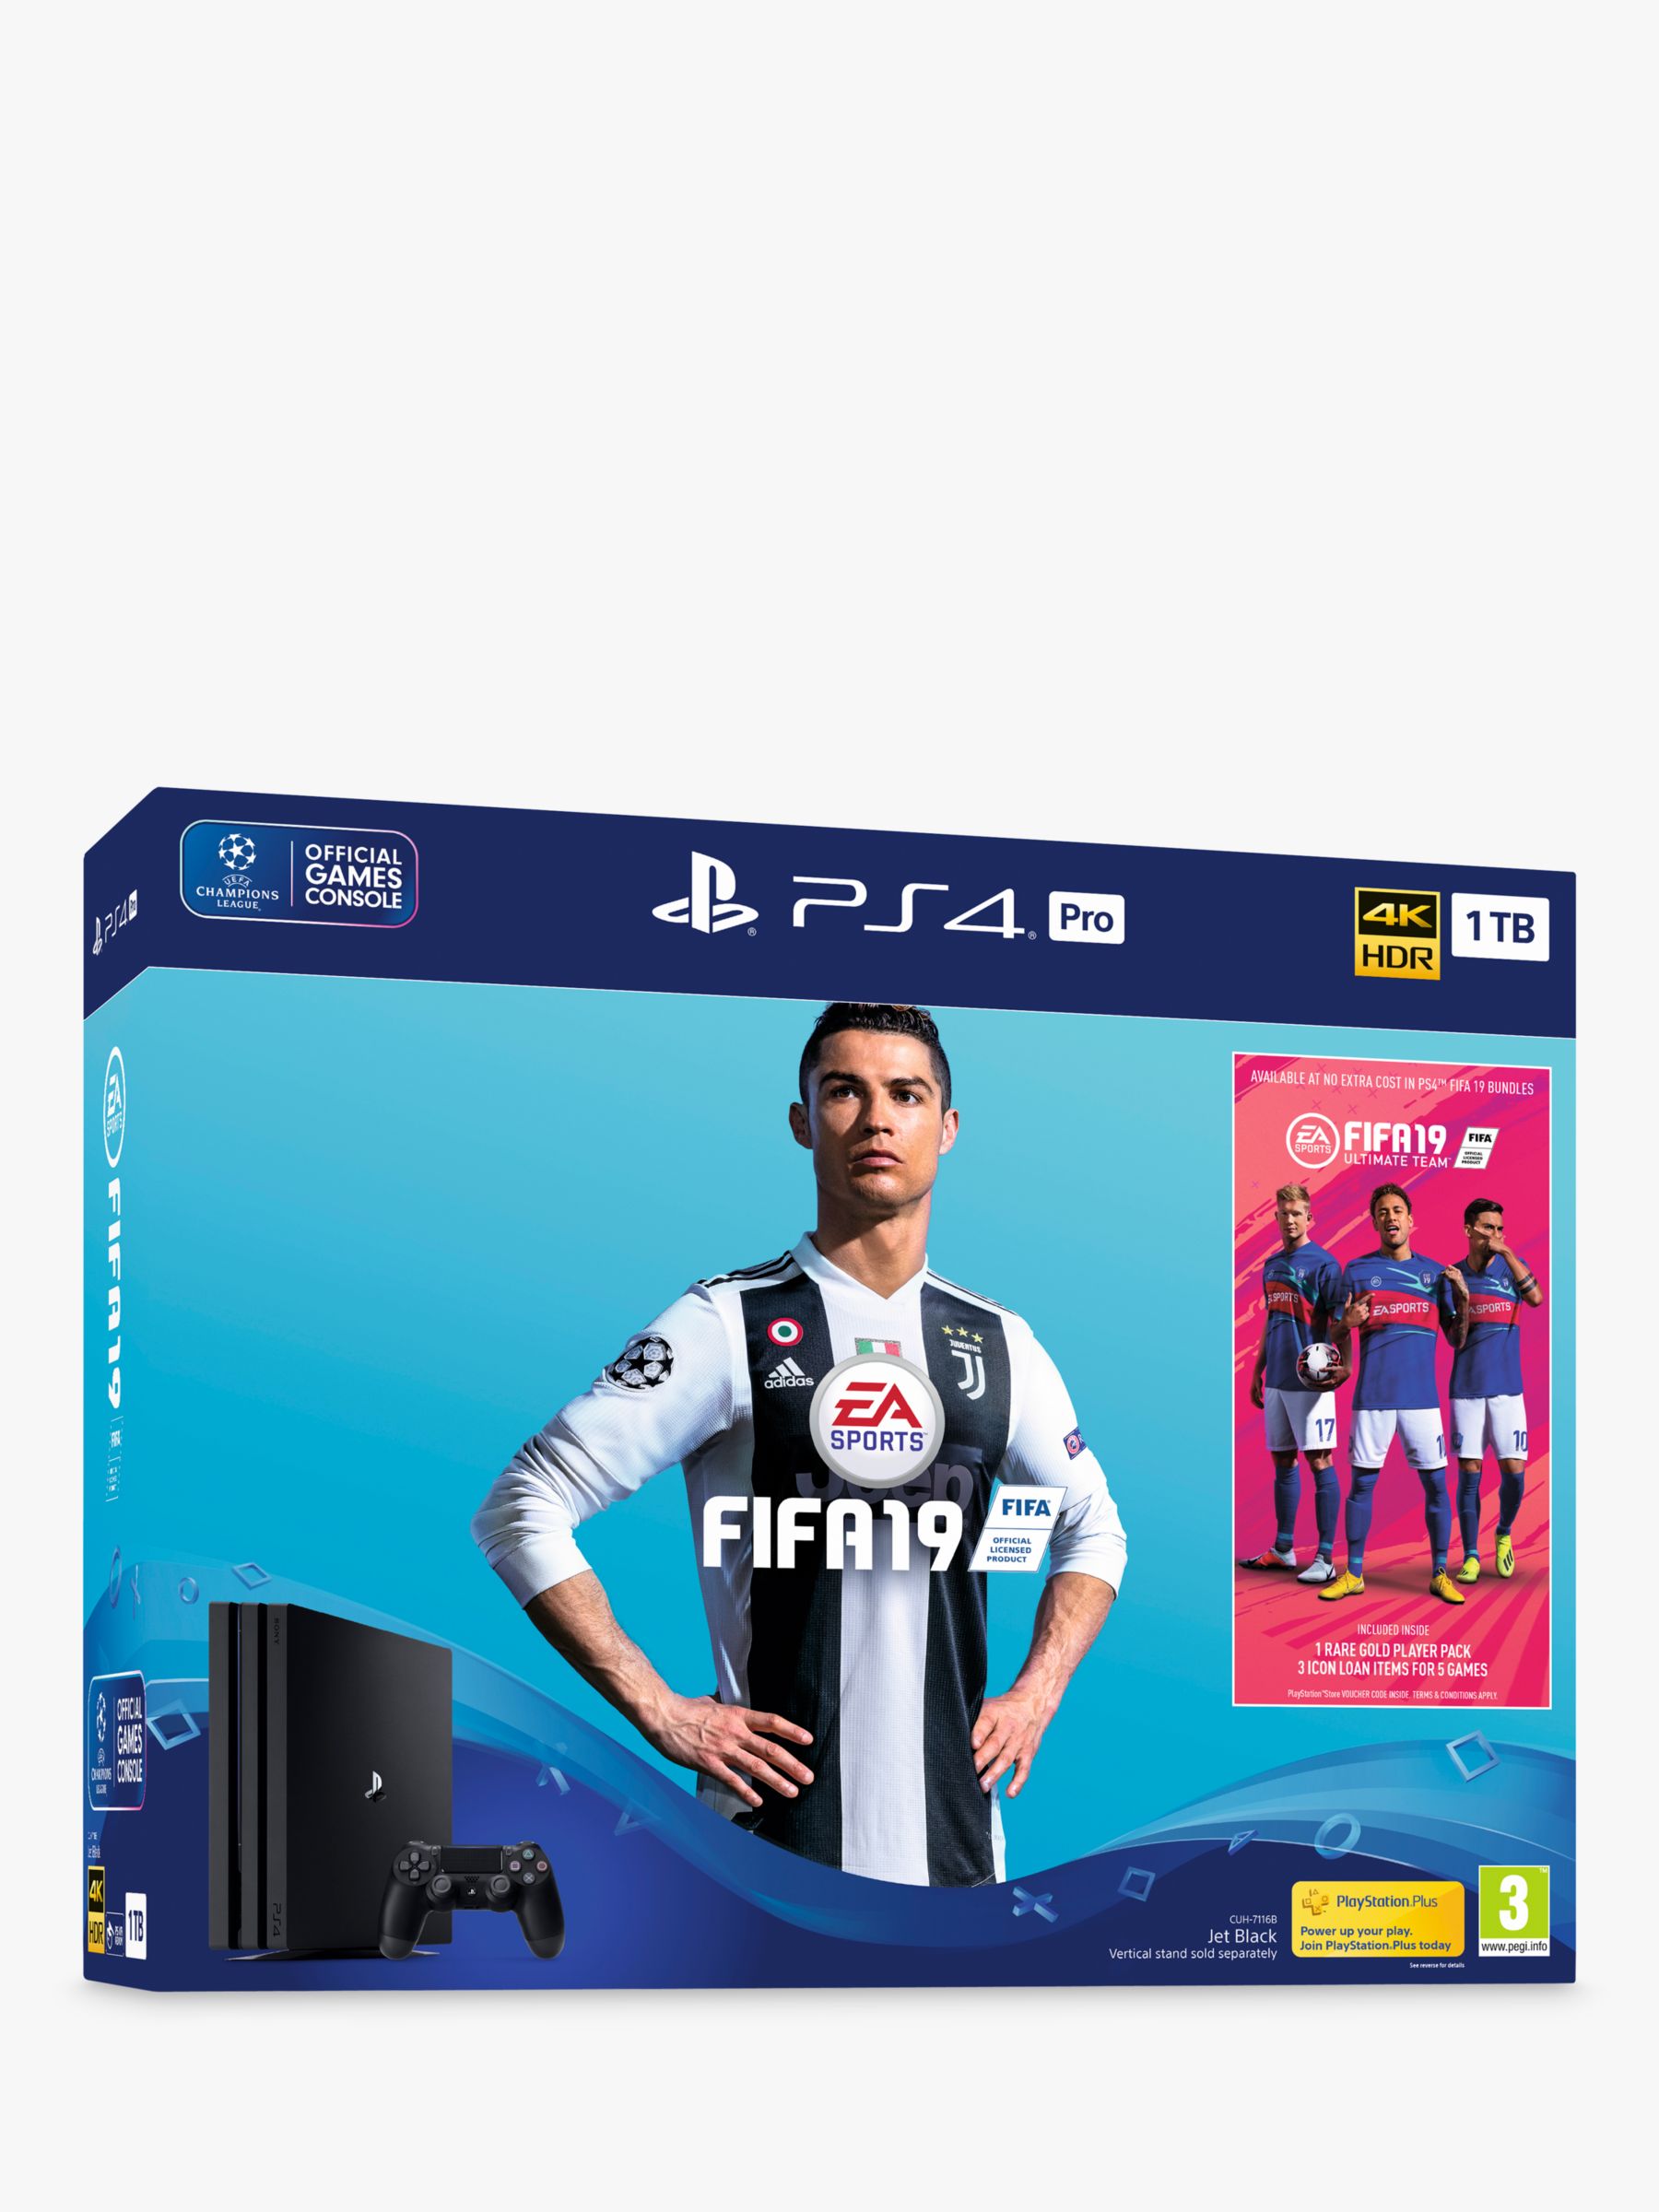 ps4 pro with fifa